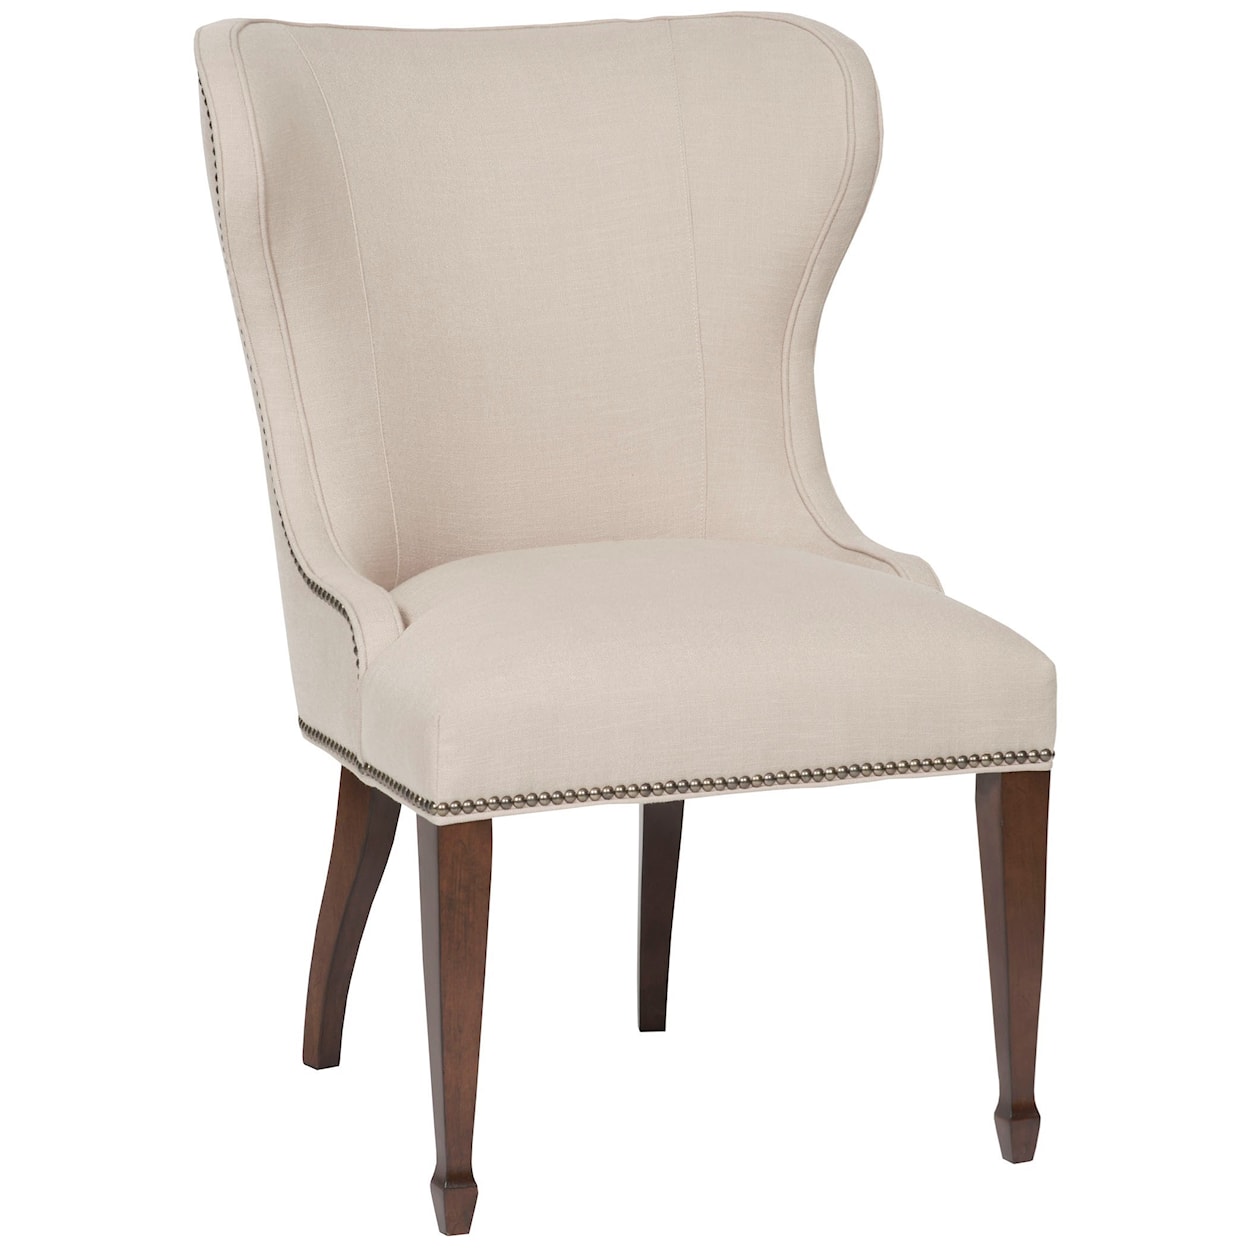 Vanguard Furniture Accent Chairs Ava Side Chair